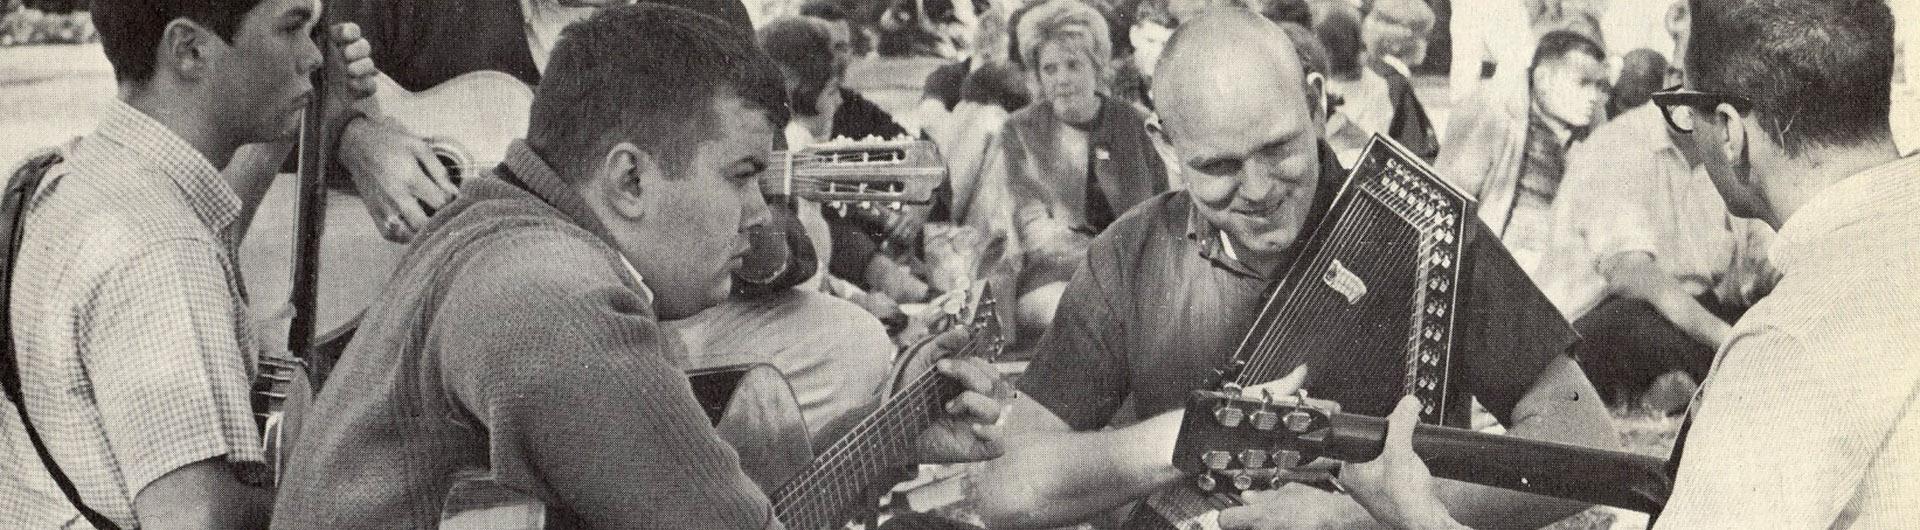 1960's campus image, students playing music